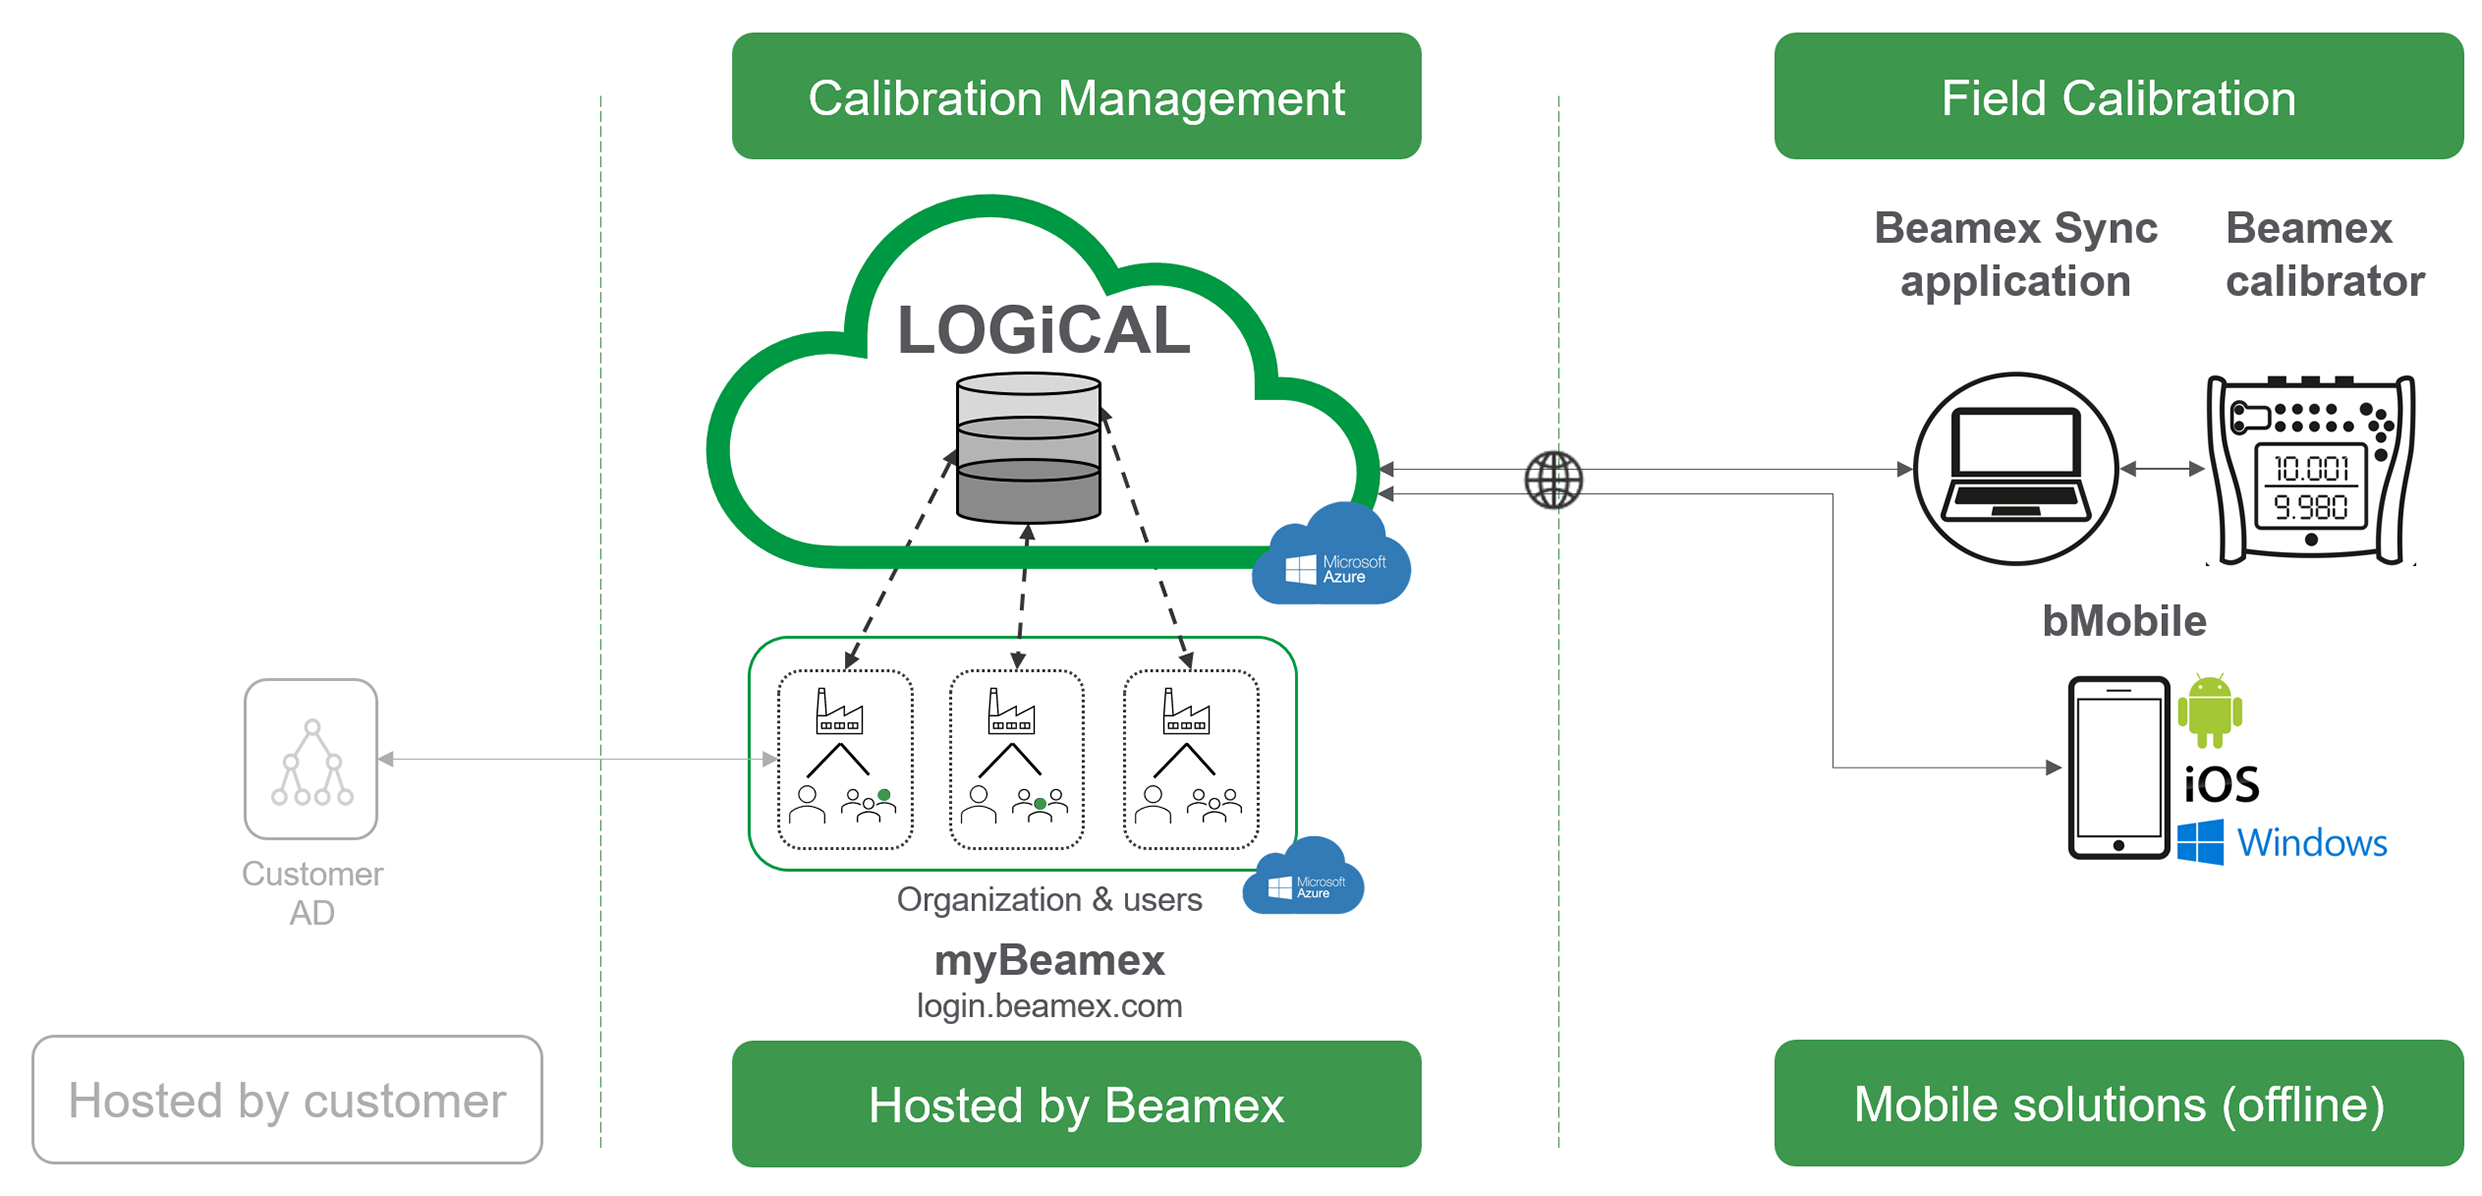 Beamex_Sync_LOGiCAL_Architecture